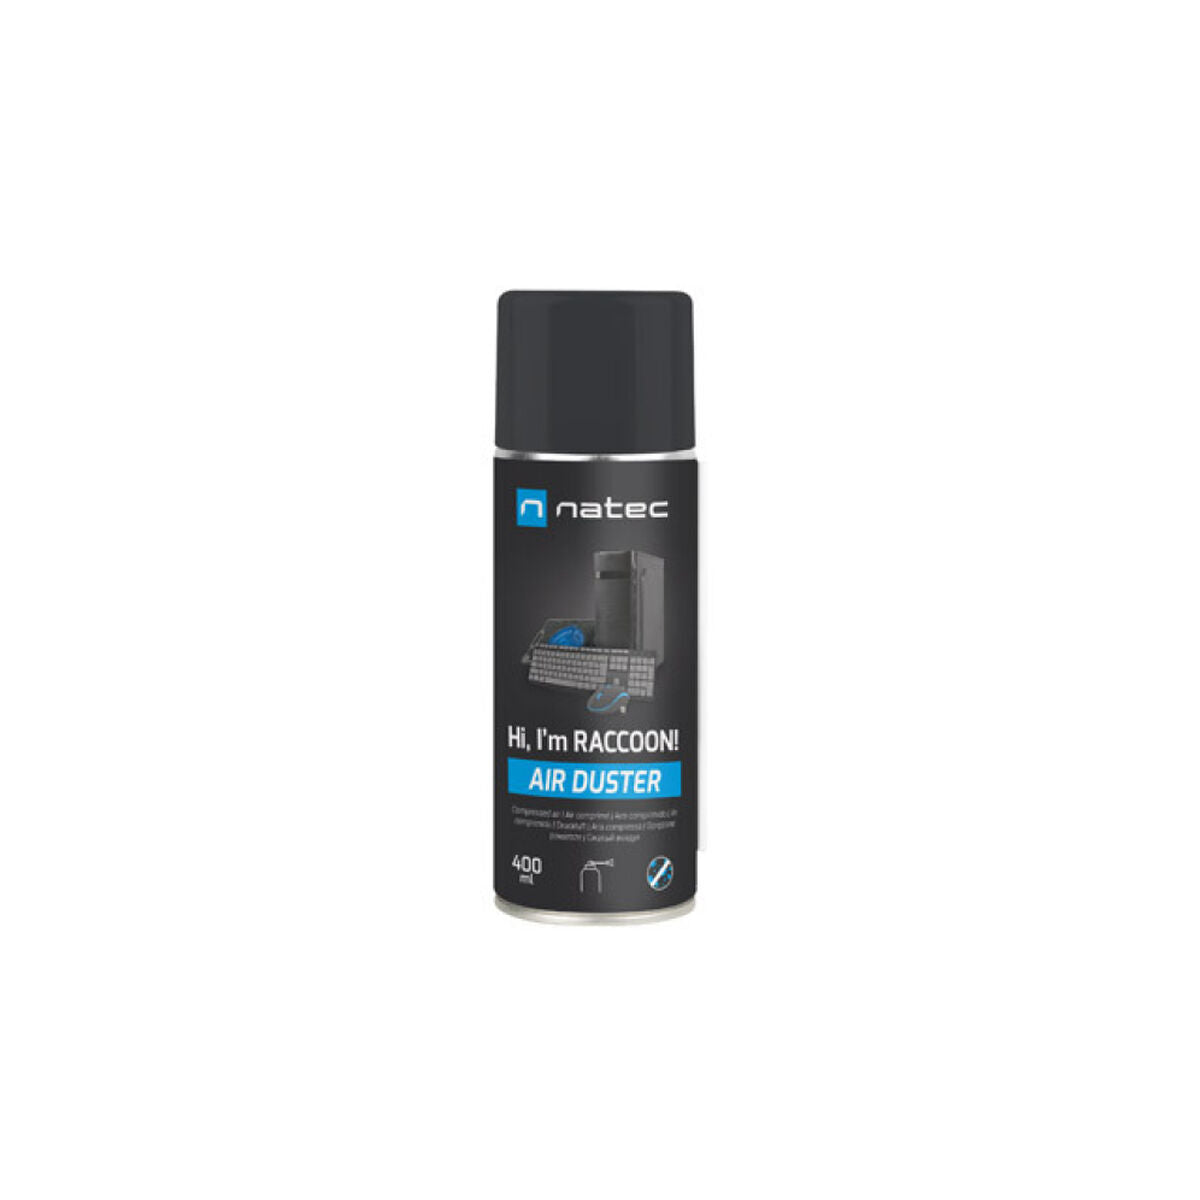 Compressed Air Natec NSC-2119 400 ml, Natec, Electronics, Photography and video cameras, compressed-air-natec-nsc-2119-400-ml, Brand_Natec, category-reference-2609, category-reference-2932, category-reference-2936, category-reference-t-19653, category-reference-t-8122, category-reference-t-8123, category-reference-t-8285, category-reference-t-8286, Condition_NEW, fotografía, Price_20 - 50, travel, RiotNook